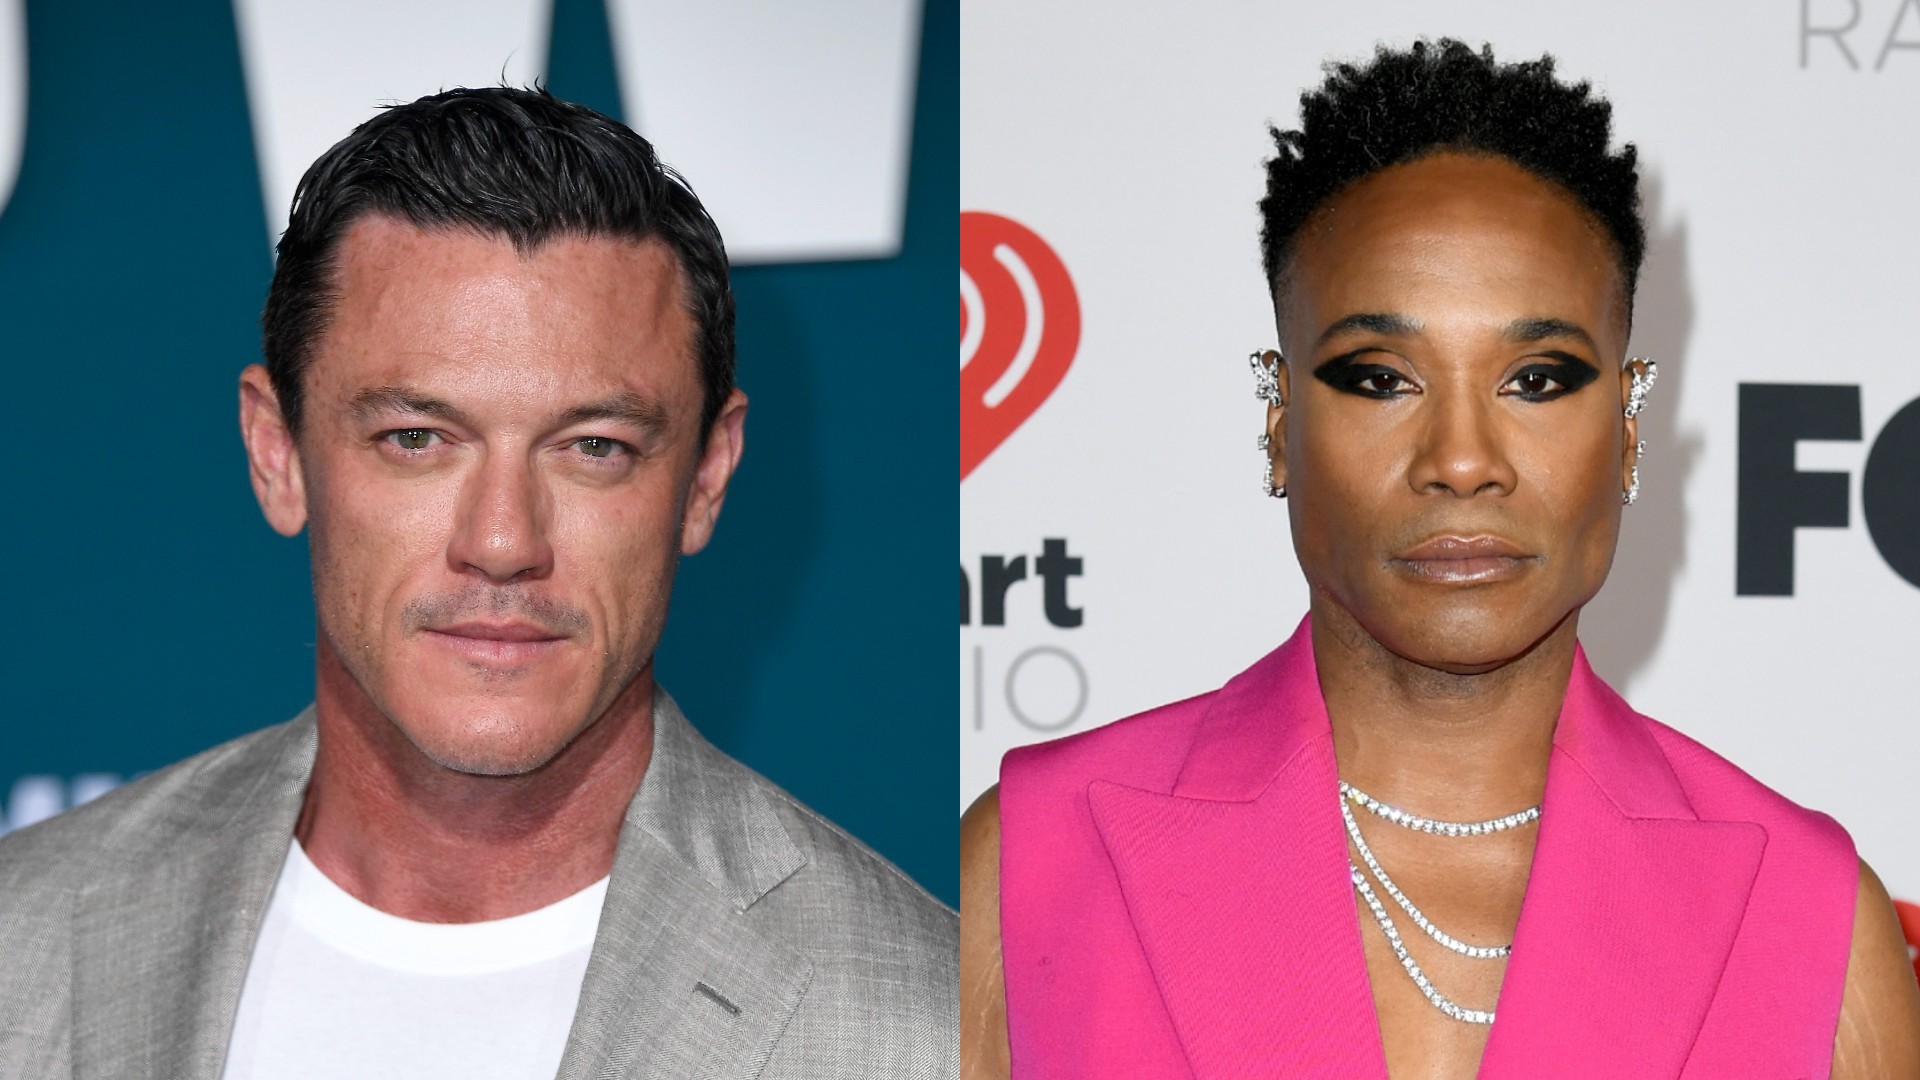 Luke Evans And Billy Porter To Star In Our Son Movie Anglophenia Bbc America 4035